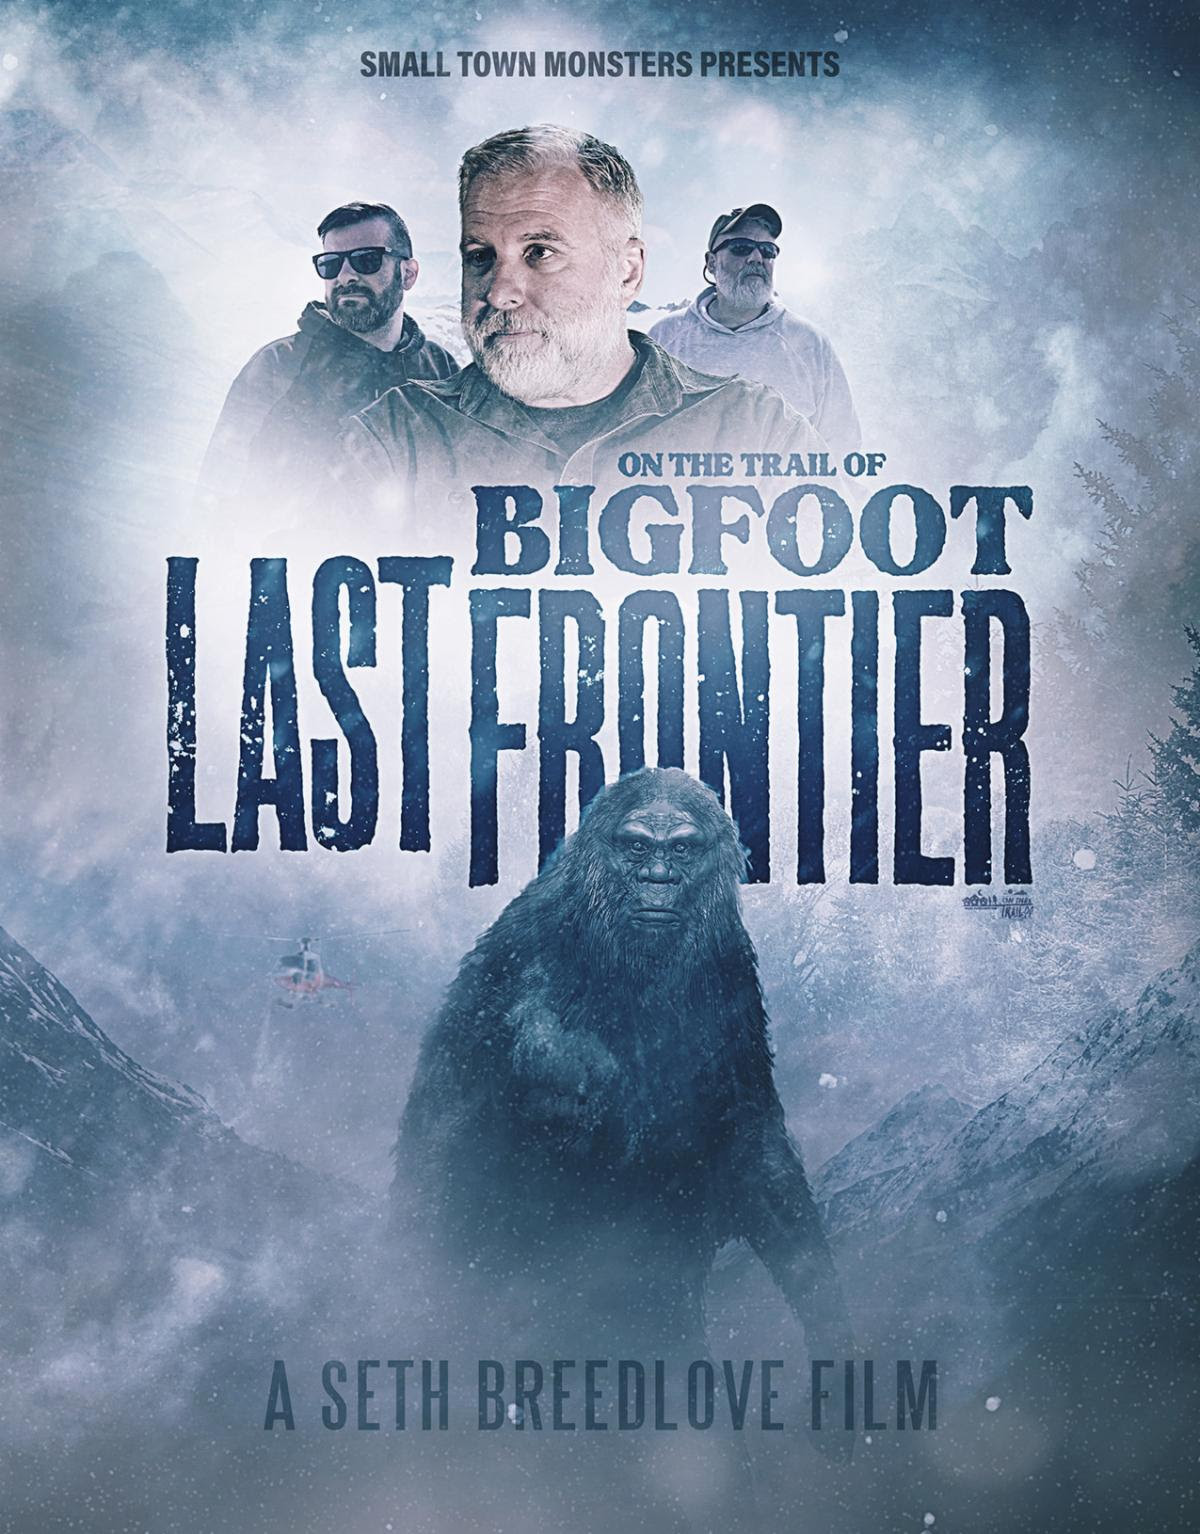 On the Trail of Bigfoot: Last Frontier Reviews - Metacritic